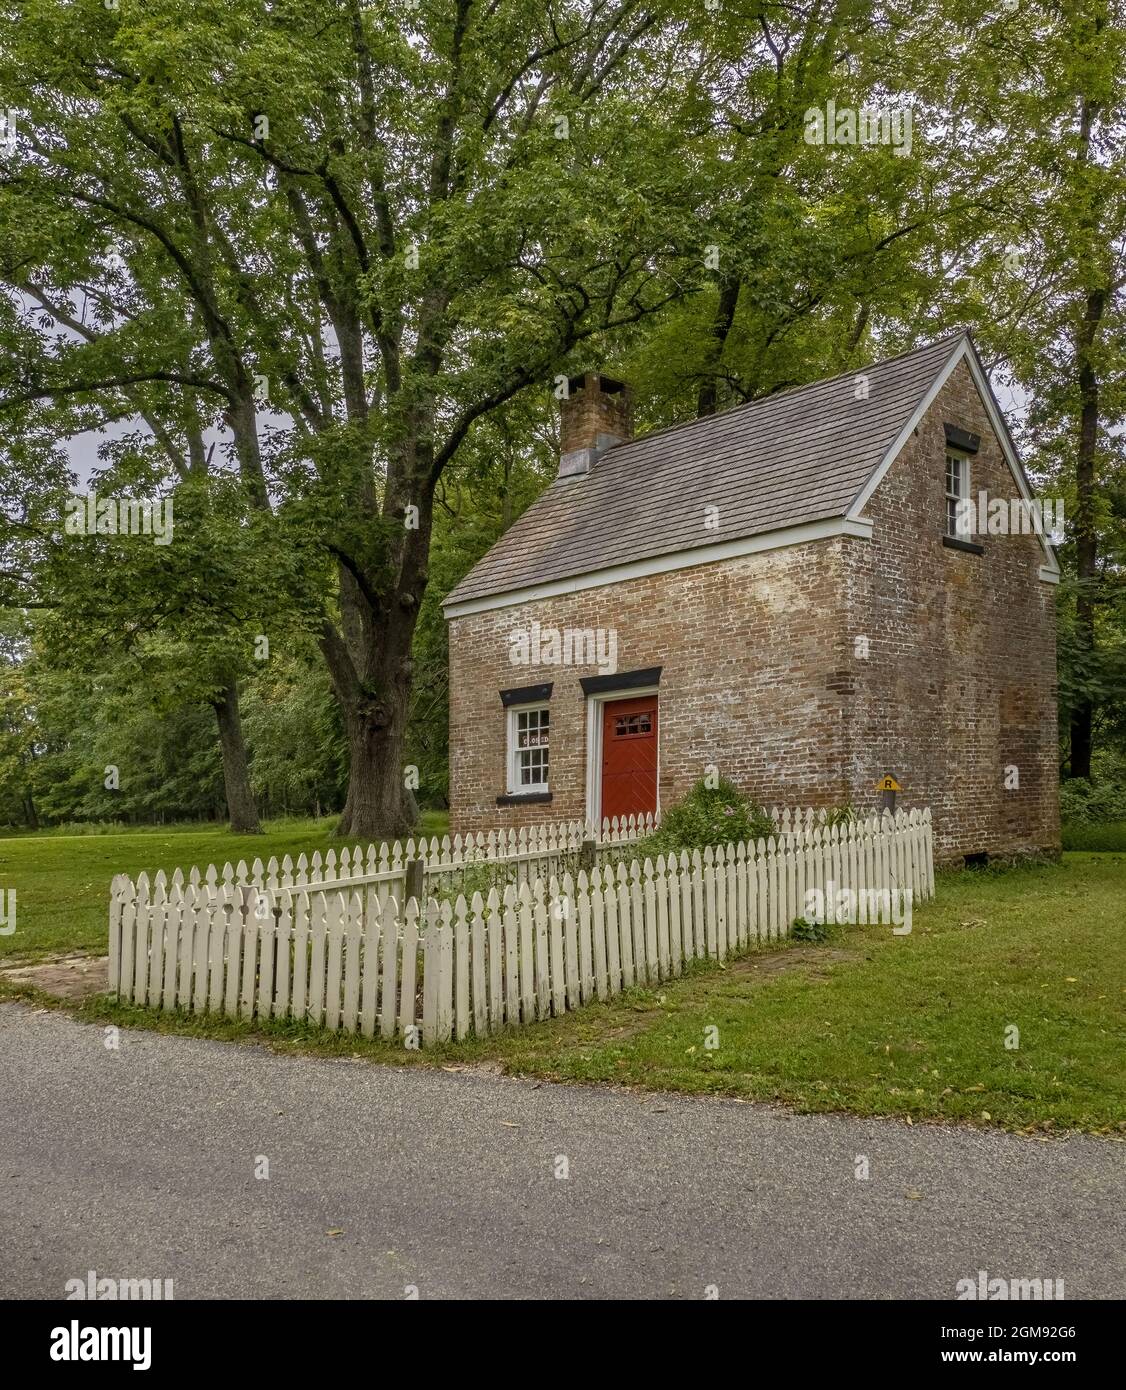 Forman Cottage, Allaire Village, Allaire State Park, Monmouth County, New Jersey Stockfoto